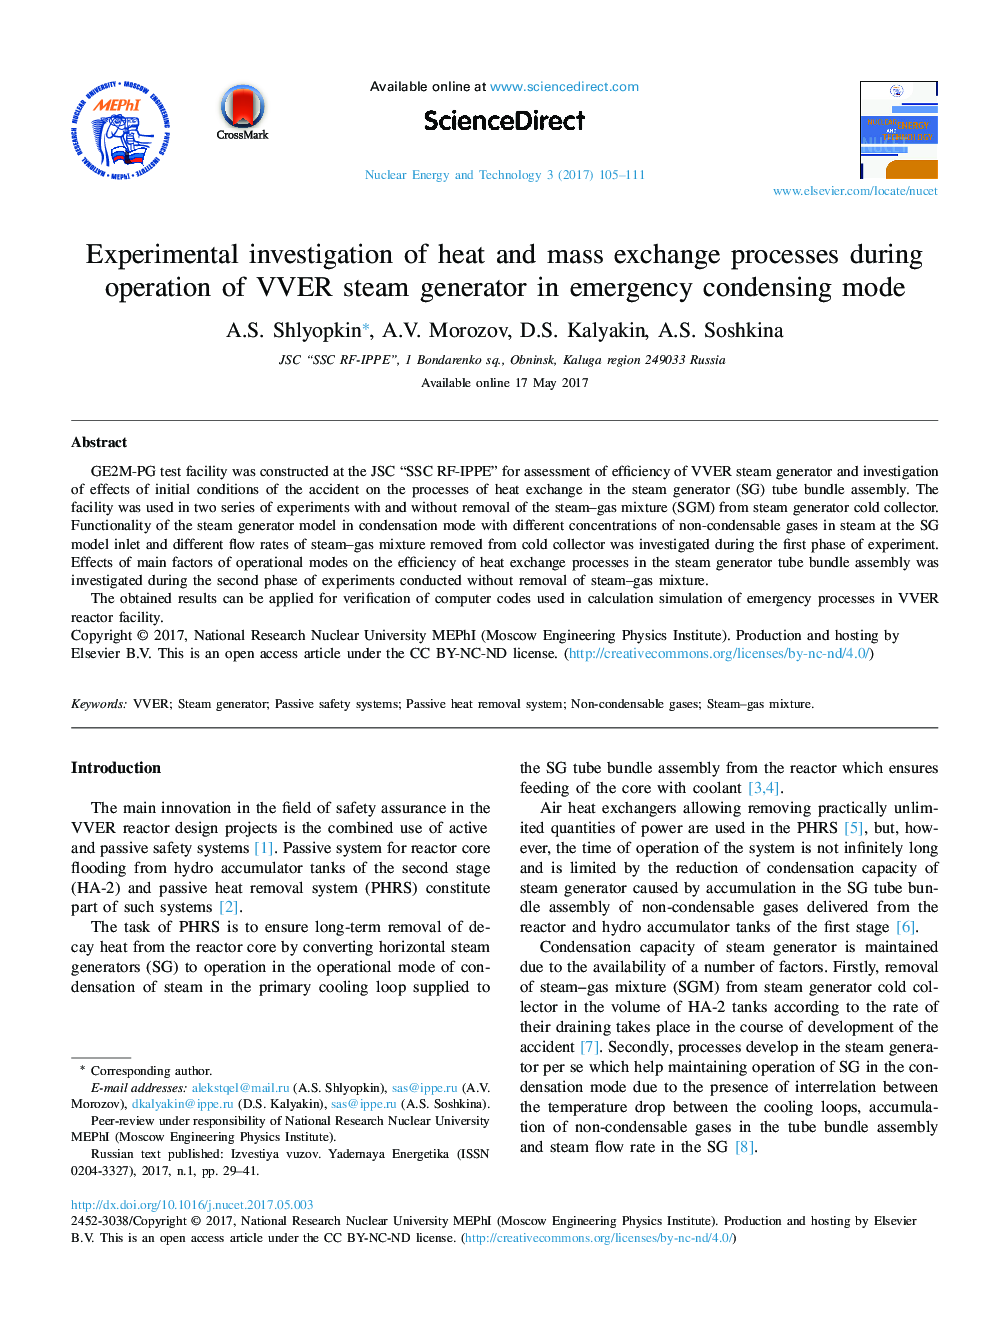 Experimental investigation of heat and mass exchange processes during operation of VVER steam generator in emergency condensing mode